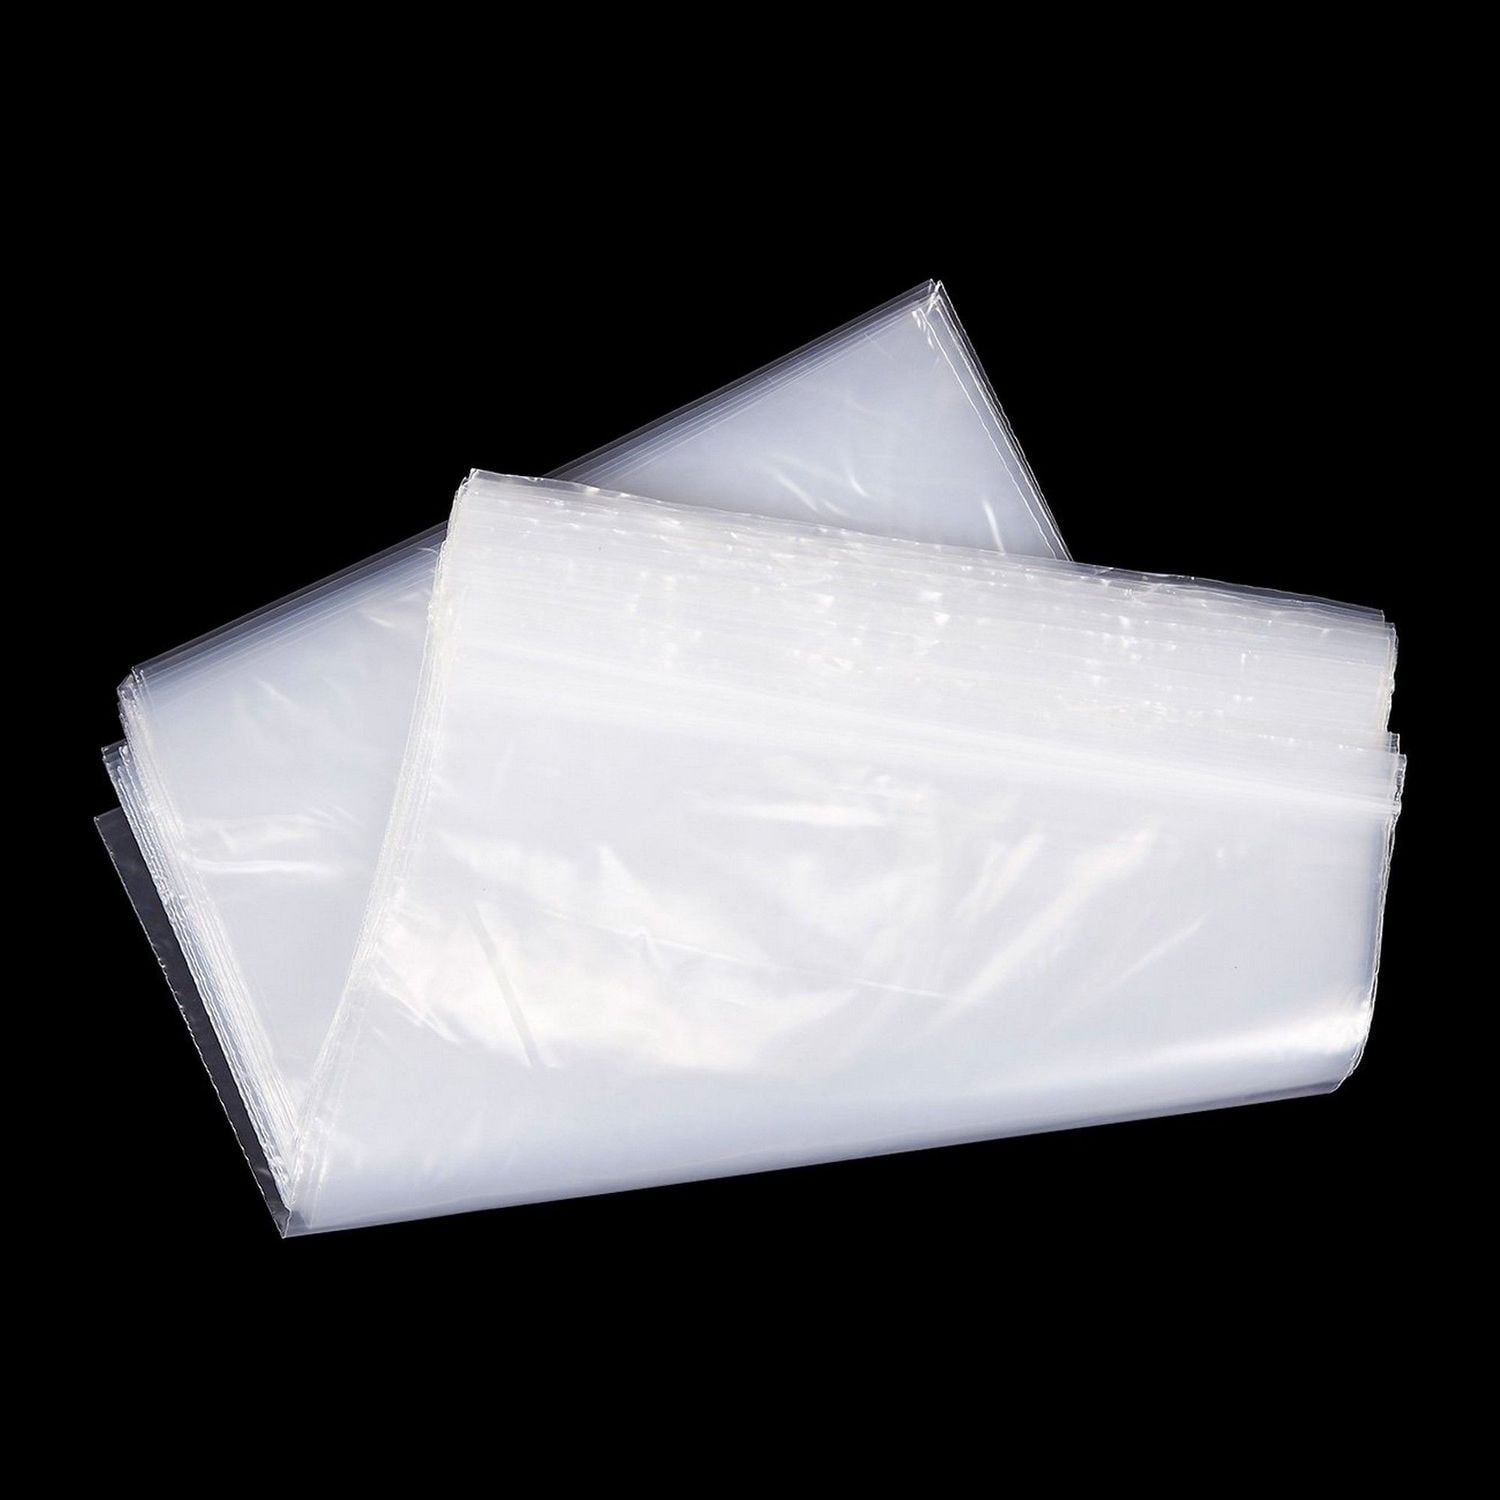 Reclosable Clear Plastic Bags, 120PC 2-Gallon Bag - On Sale - Bed